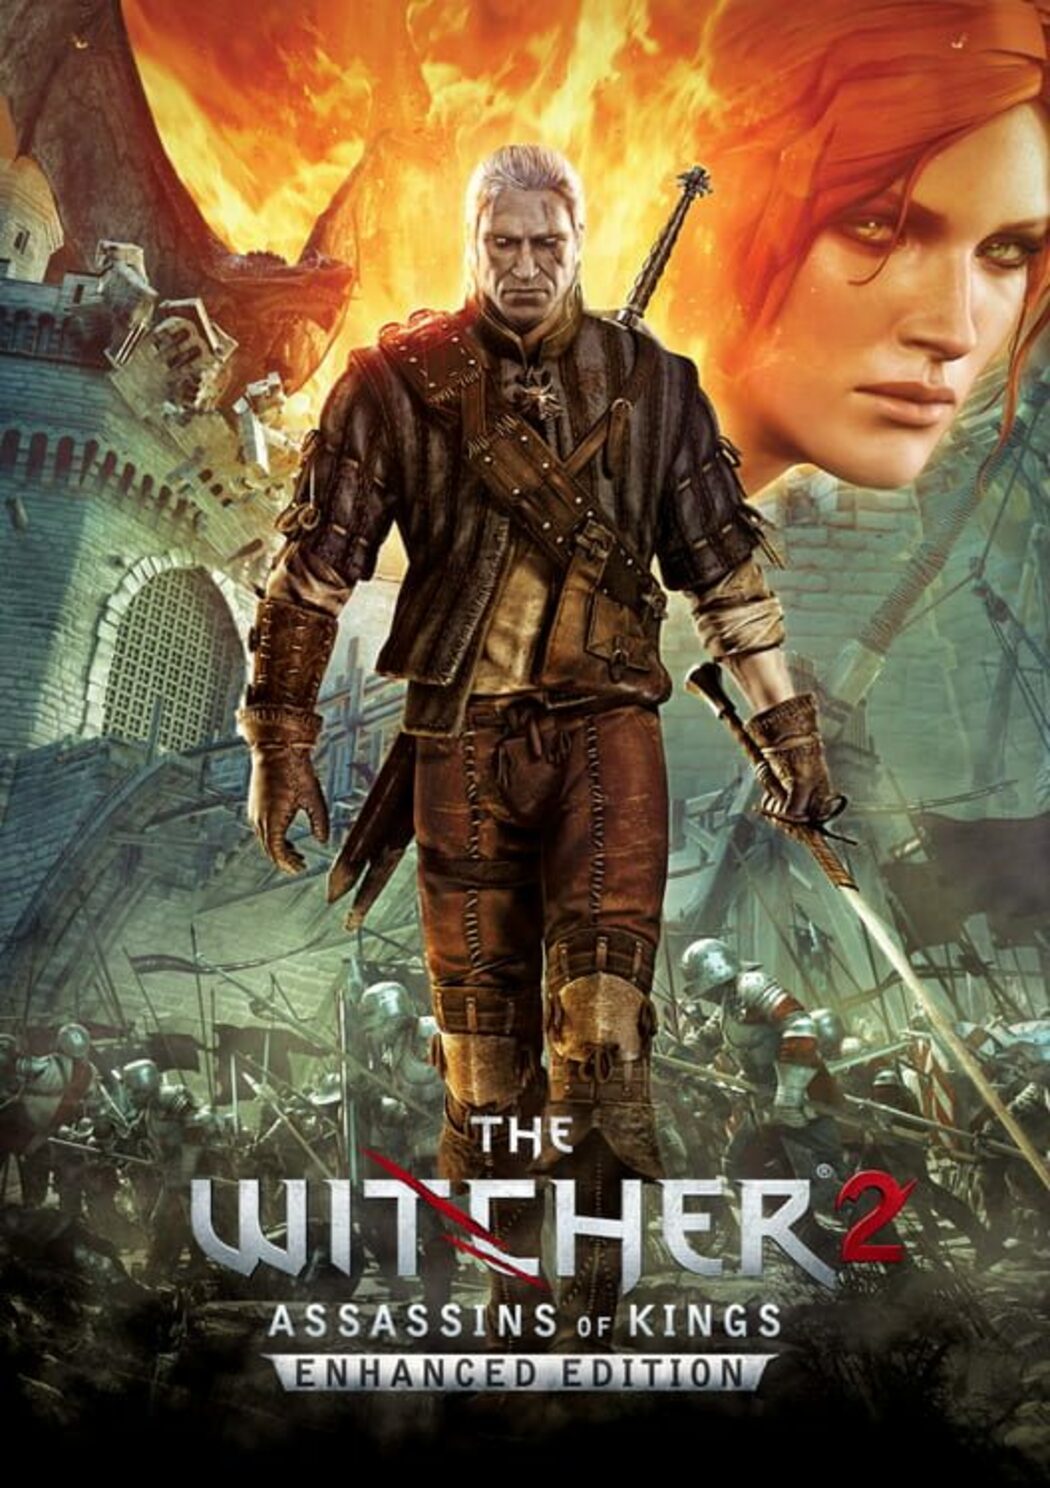 CD PROJEKT RED FANS: The Witcher: Enhanced Edition - Gráficos